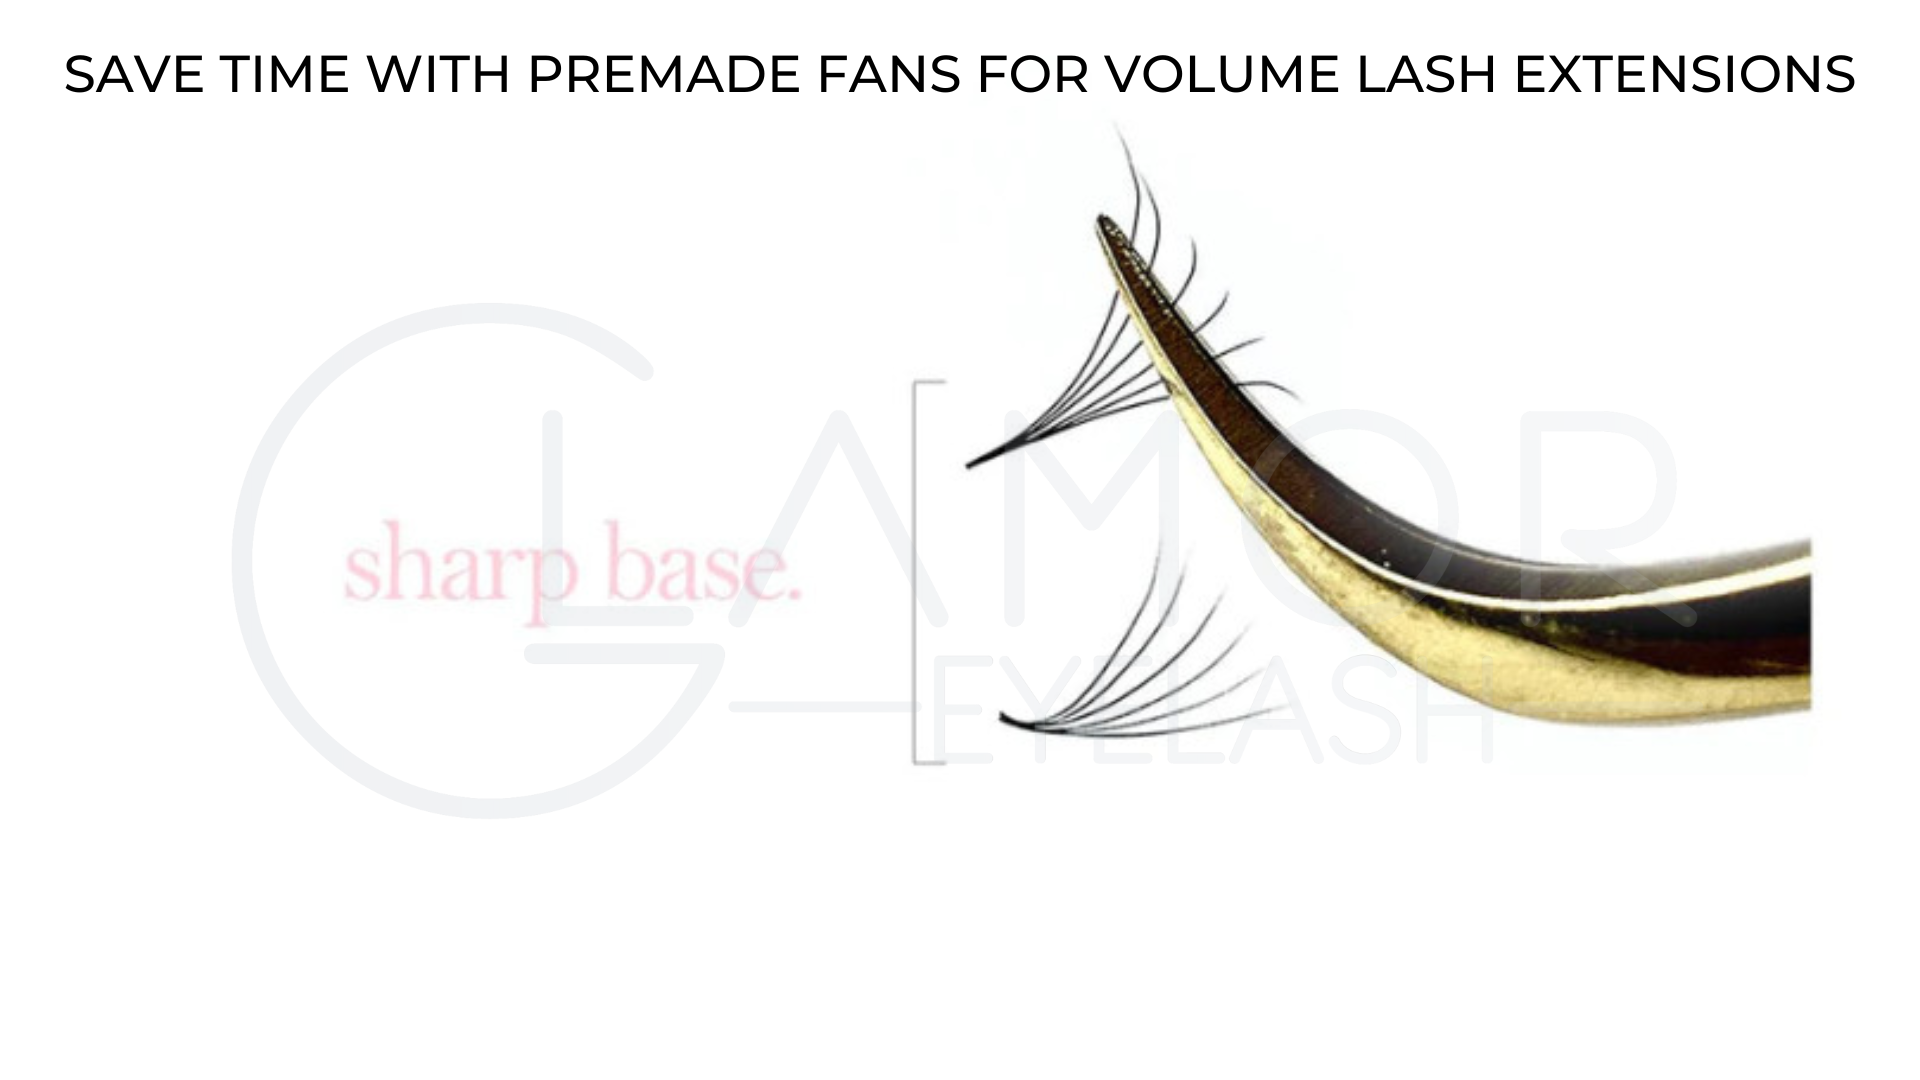 SAVE TIME WITH PREMADE FANS FOR VOLUME LASH EXTENSIONS